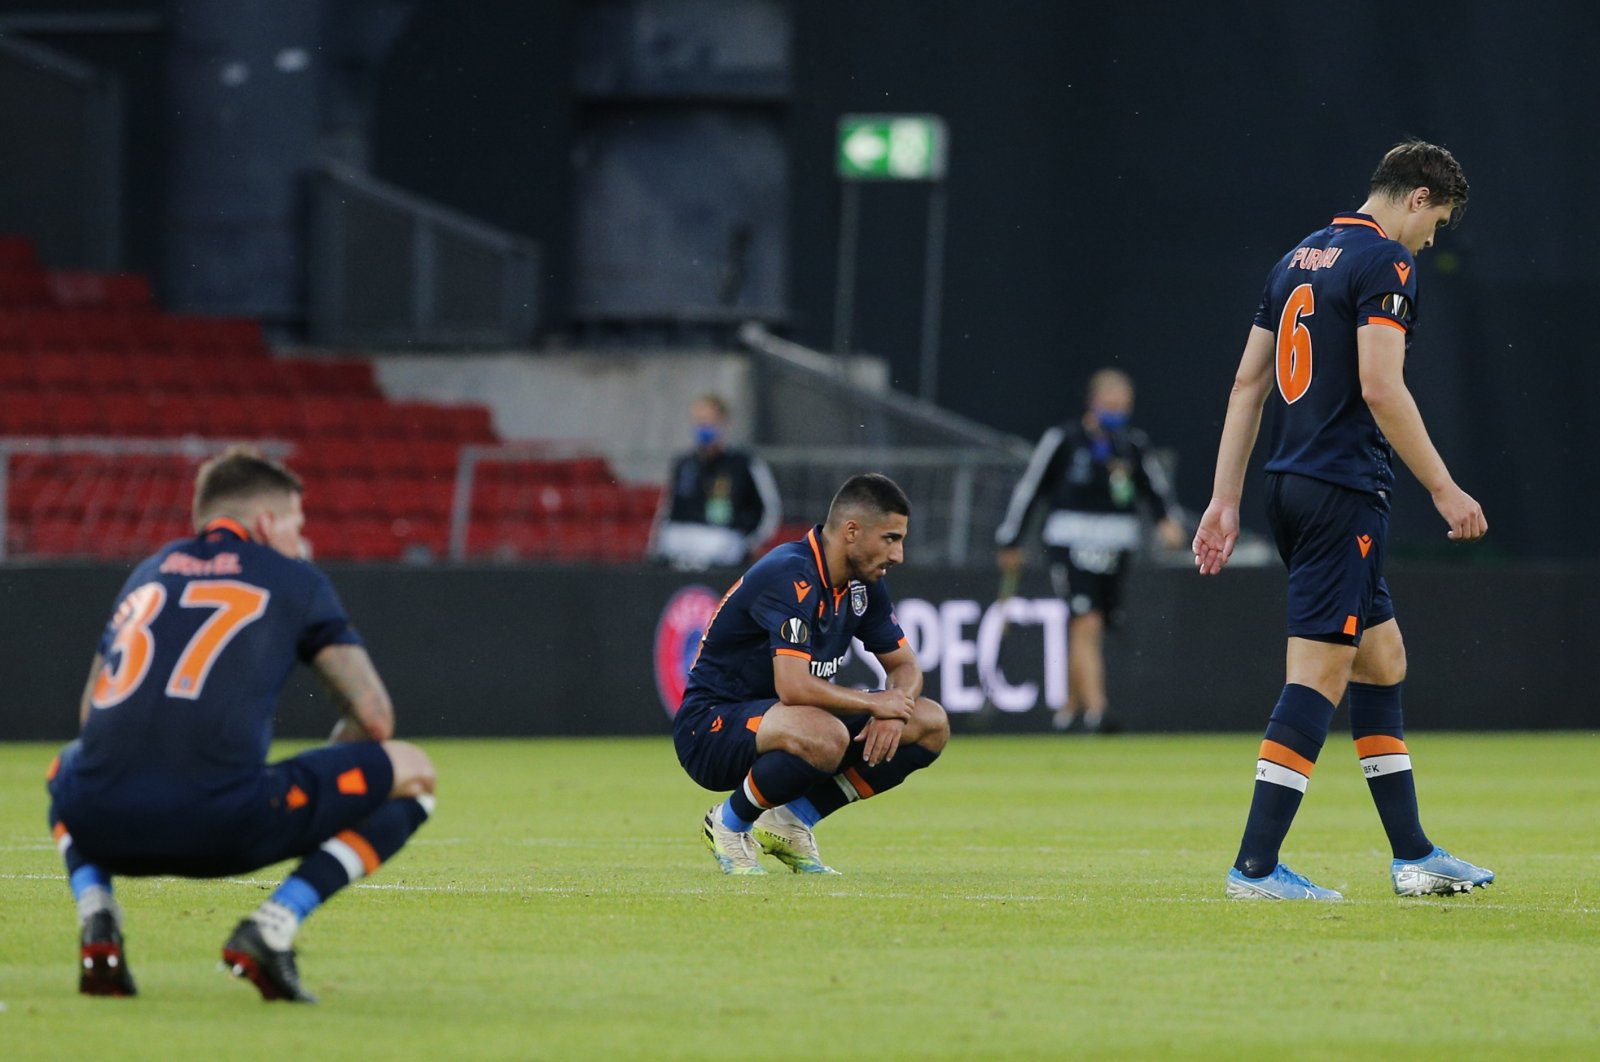 Başakşehir players linger on the field after the match with Copenhagen in the Danish capital, Aug 5, 2020. (AA Photo)